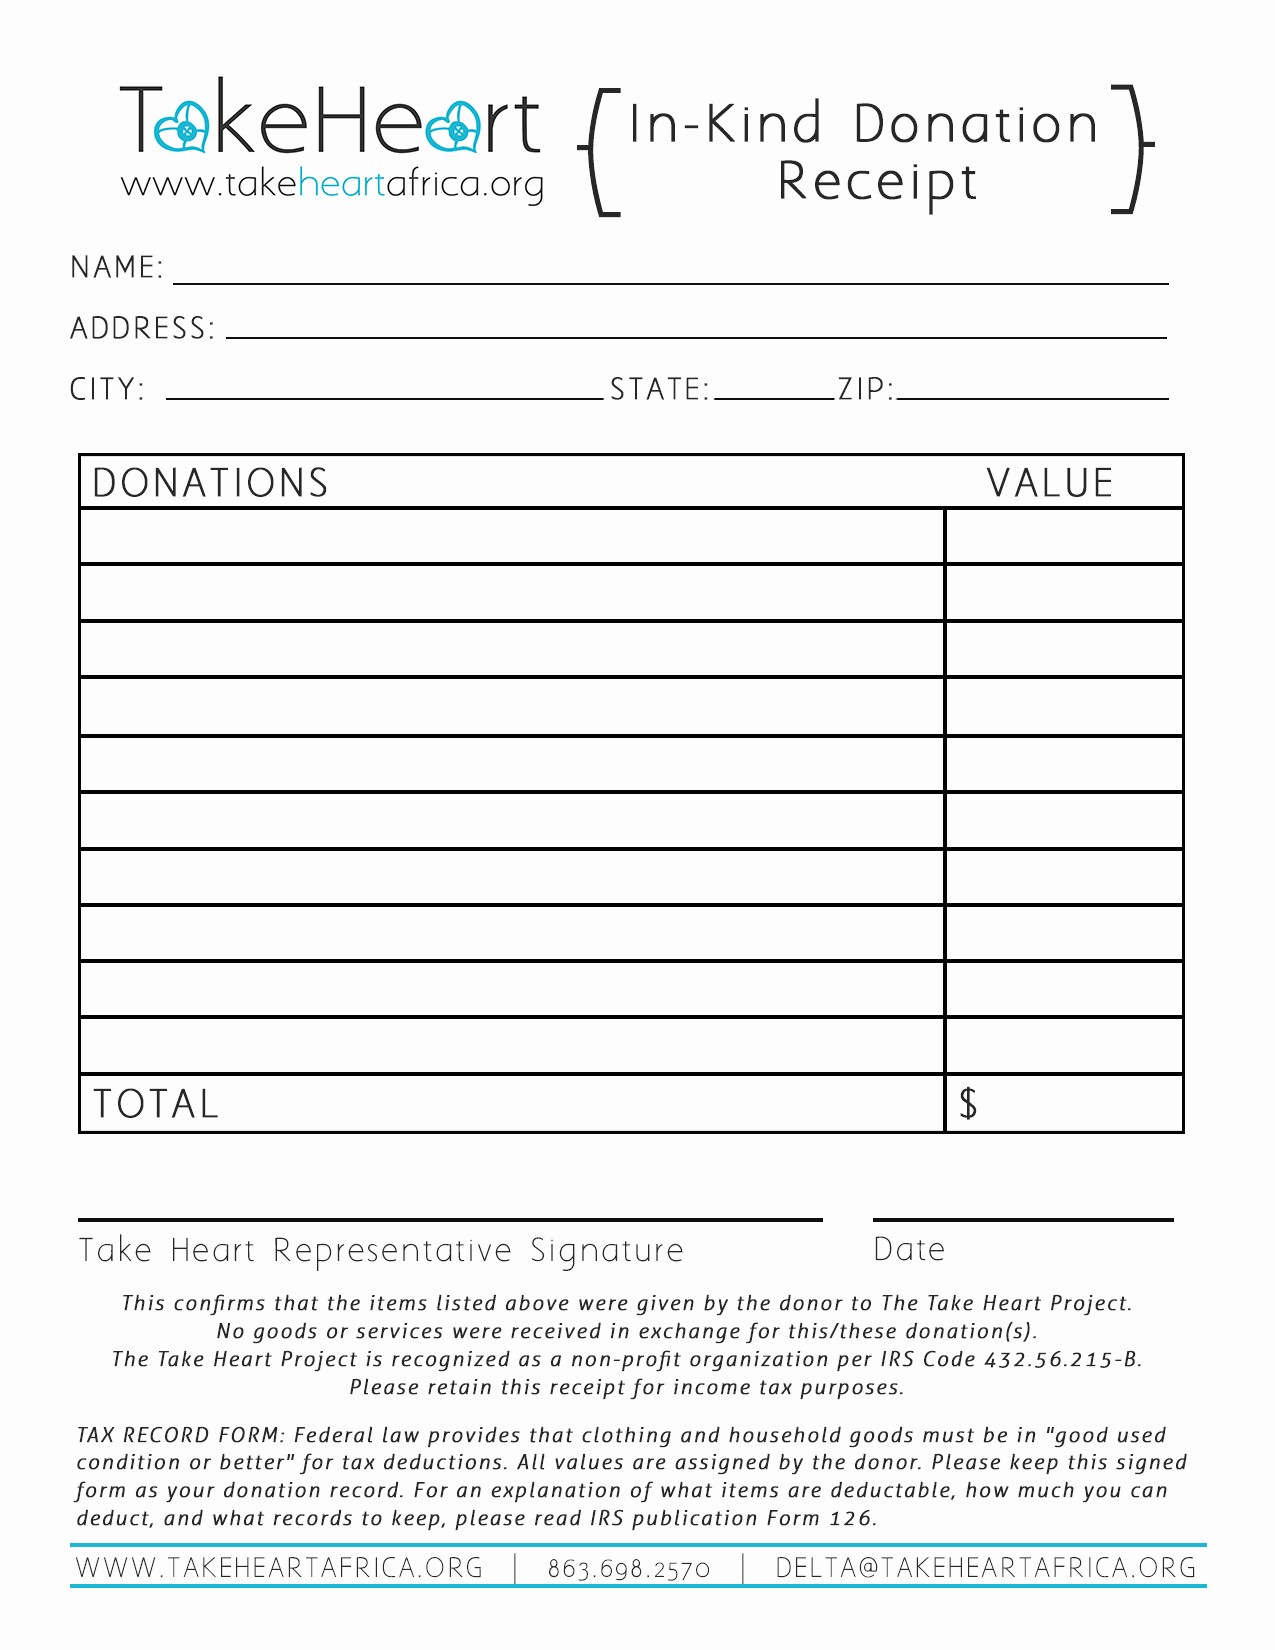 Donation form for Tax Purposes Inspirational In Kind Donations Take Heart Africa